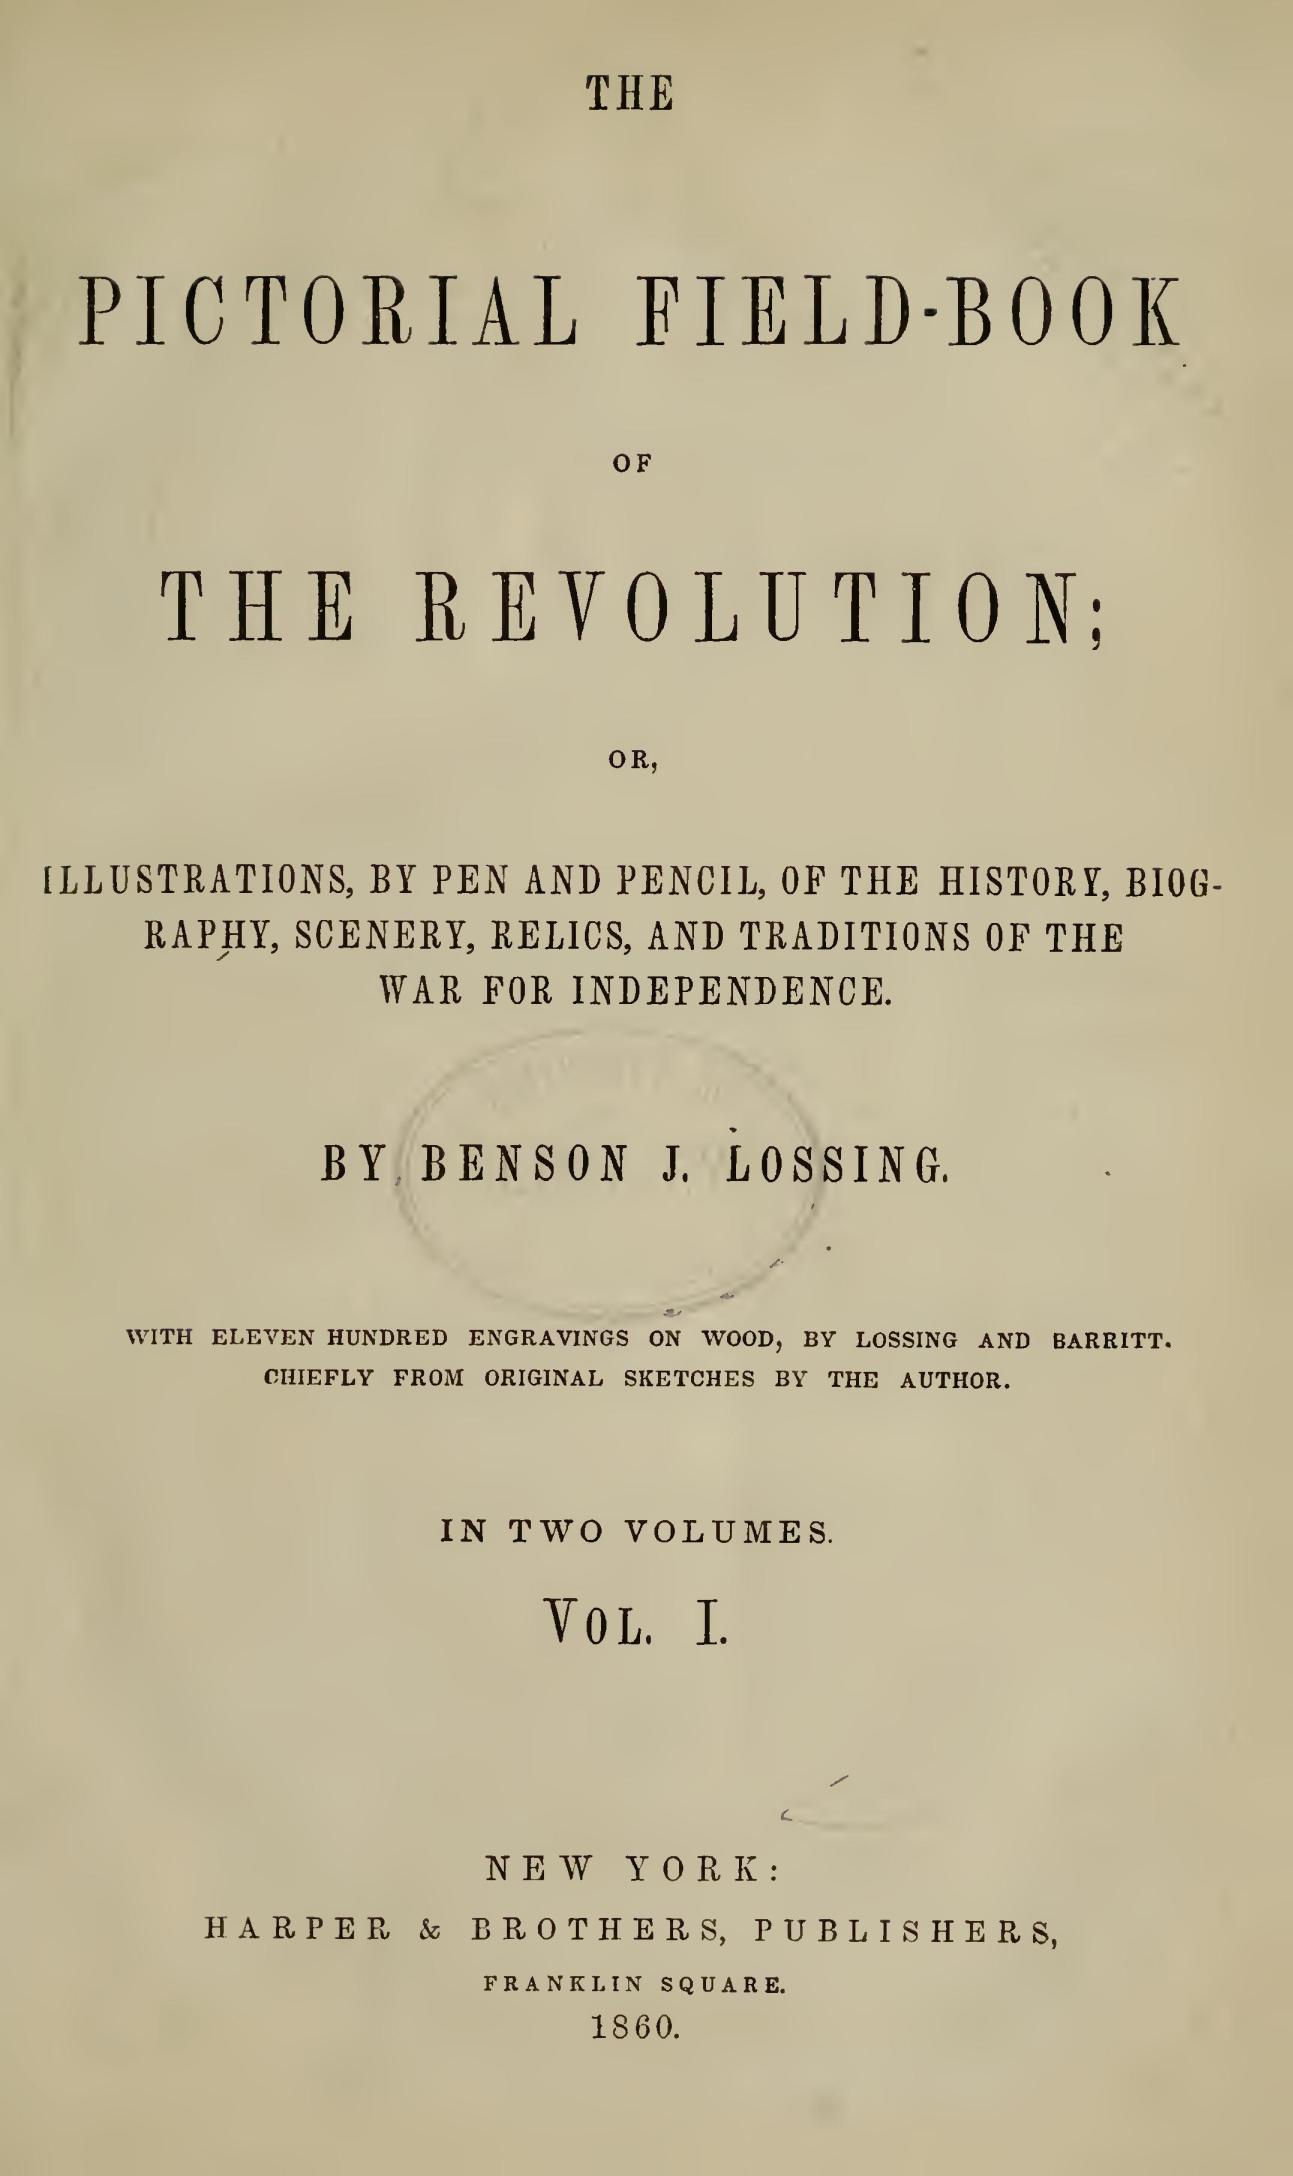 The Pictorial Field-Book of the Revolution, Vol. 1 (of 2)&#10;or, Illustrations, by Pen And Pencil, of the History, Biography, Scenery, Relics, and Traditions of the War for Independence